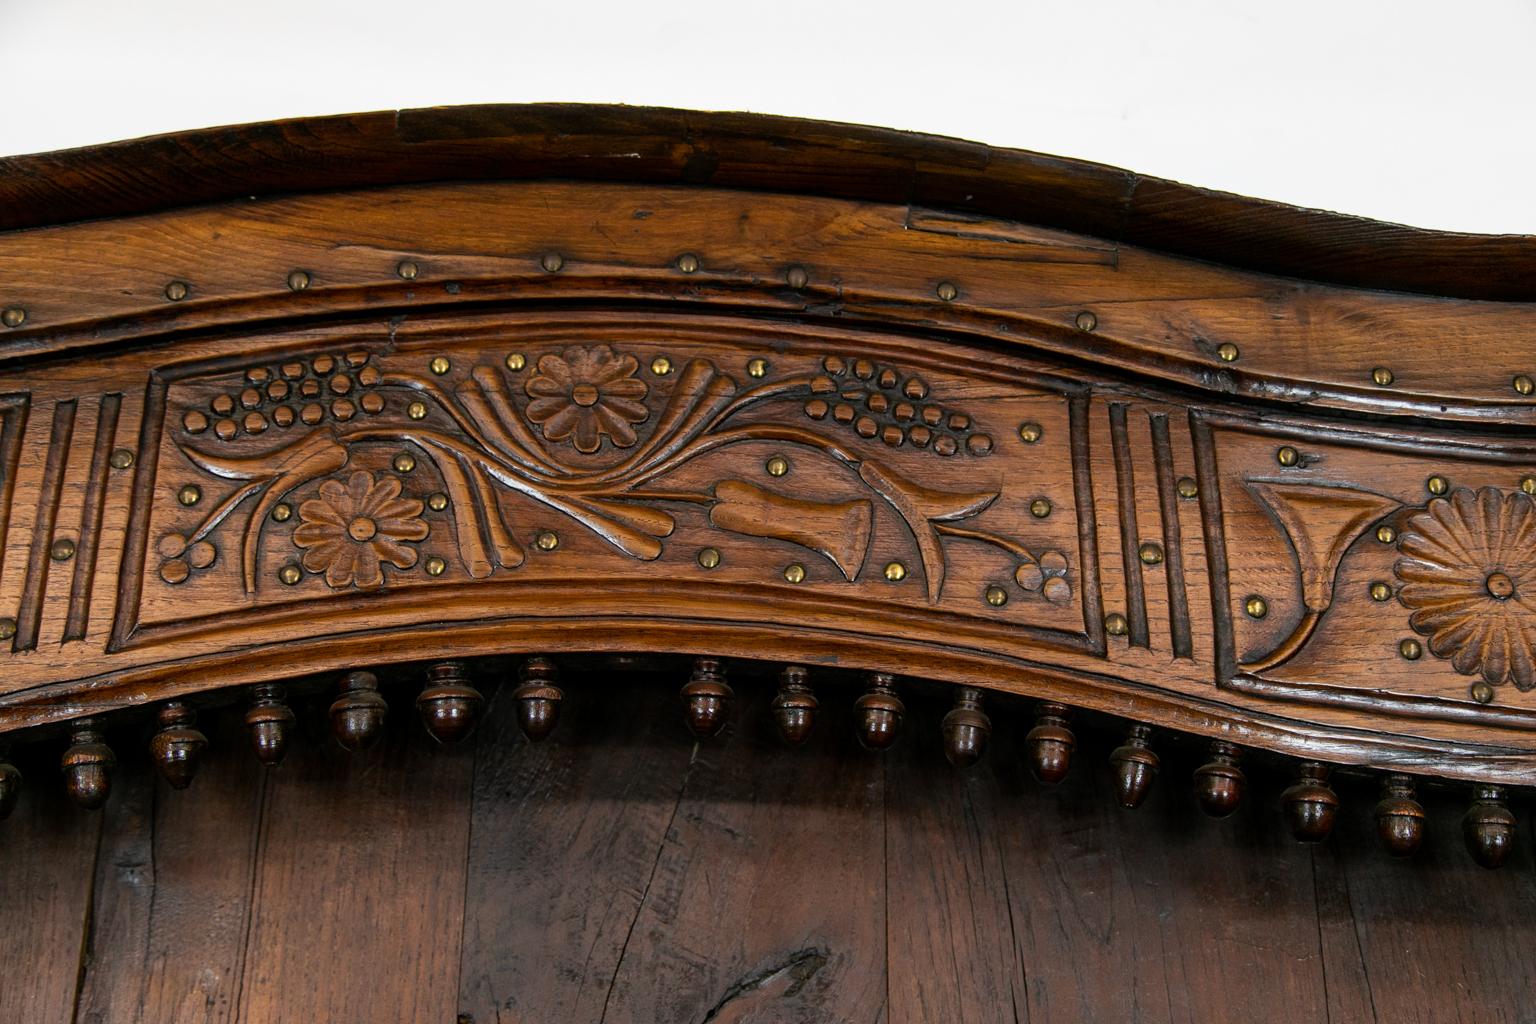 18th century French Walnut vasselier, with floral carvings and brass stud work ornamentation. Large original engraved escutcheons grace the front. The top has a serpentine shaped crest. Molded spindle galleries accent the three shelves. Elaborate